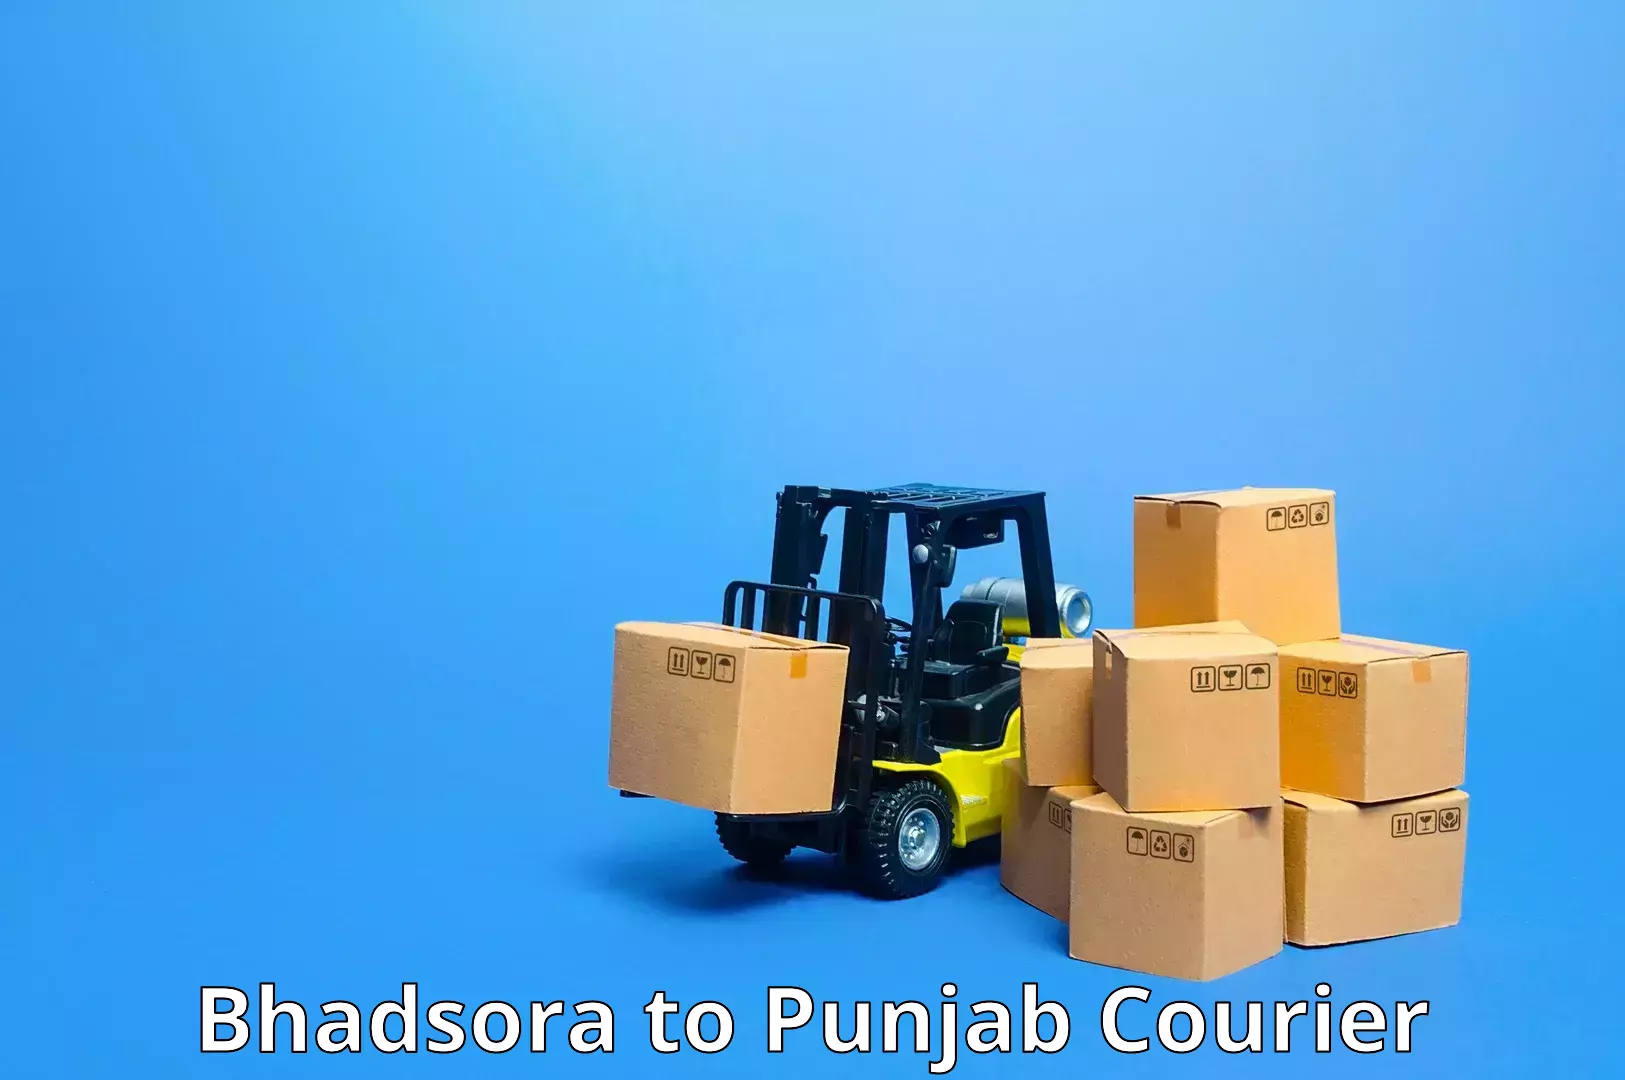 Rural area delivery Bhadsora to Amritsar